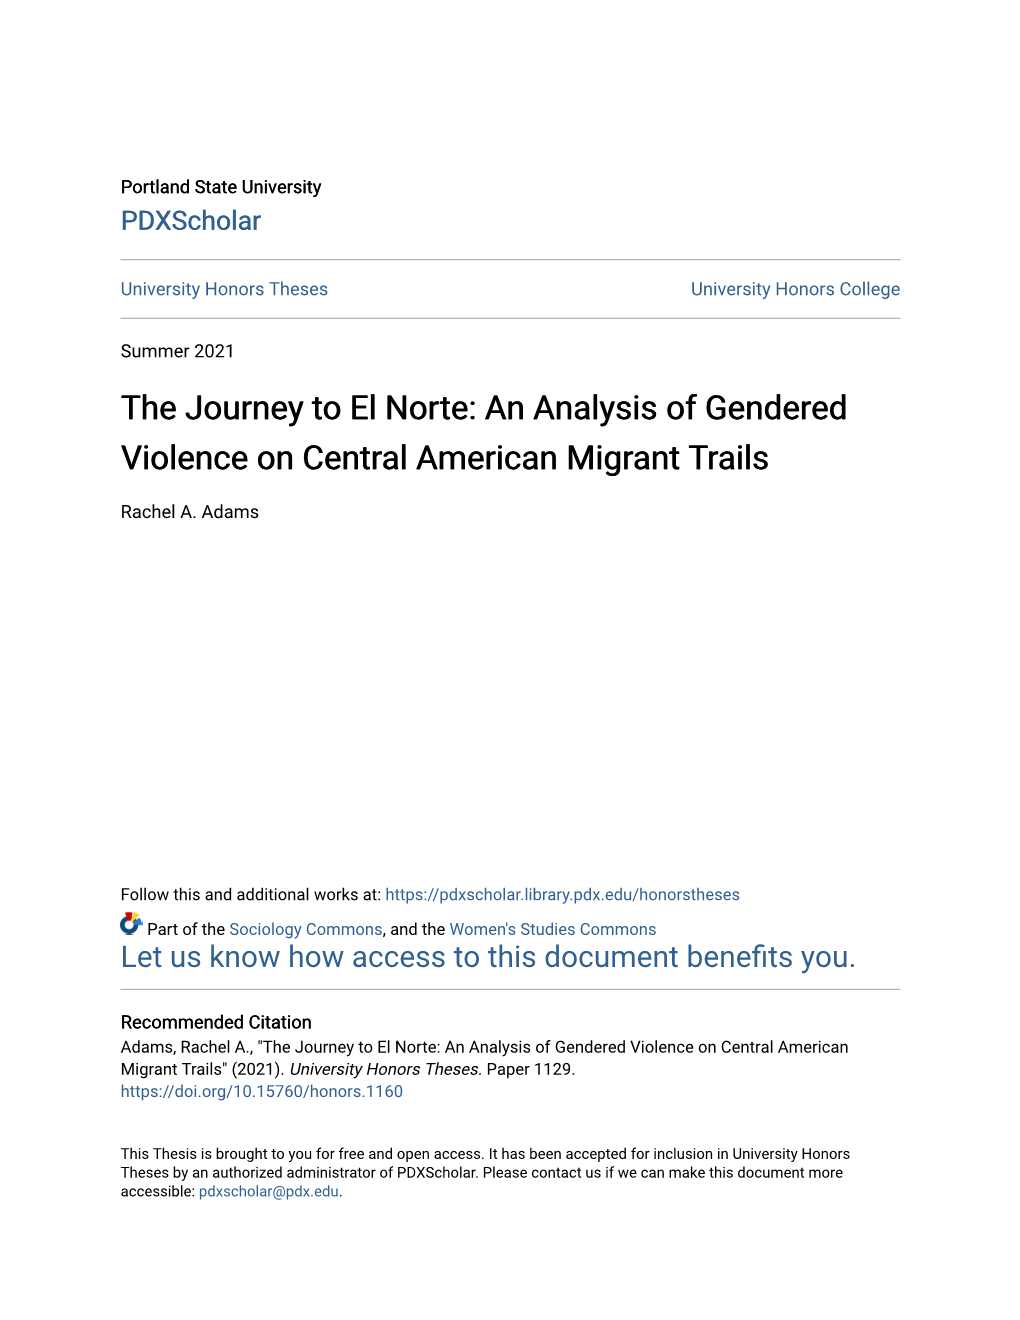 An Analysis of Gendered Violence on Central American Migrant Trails